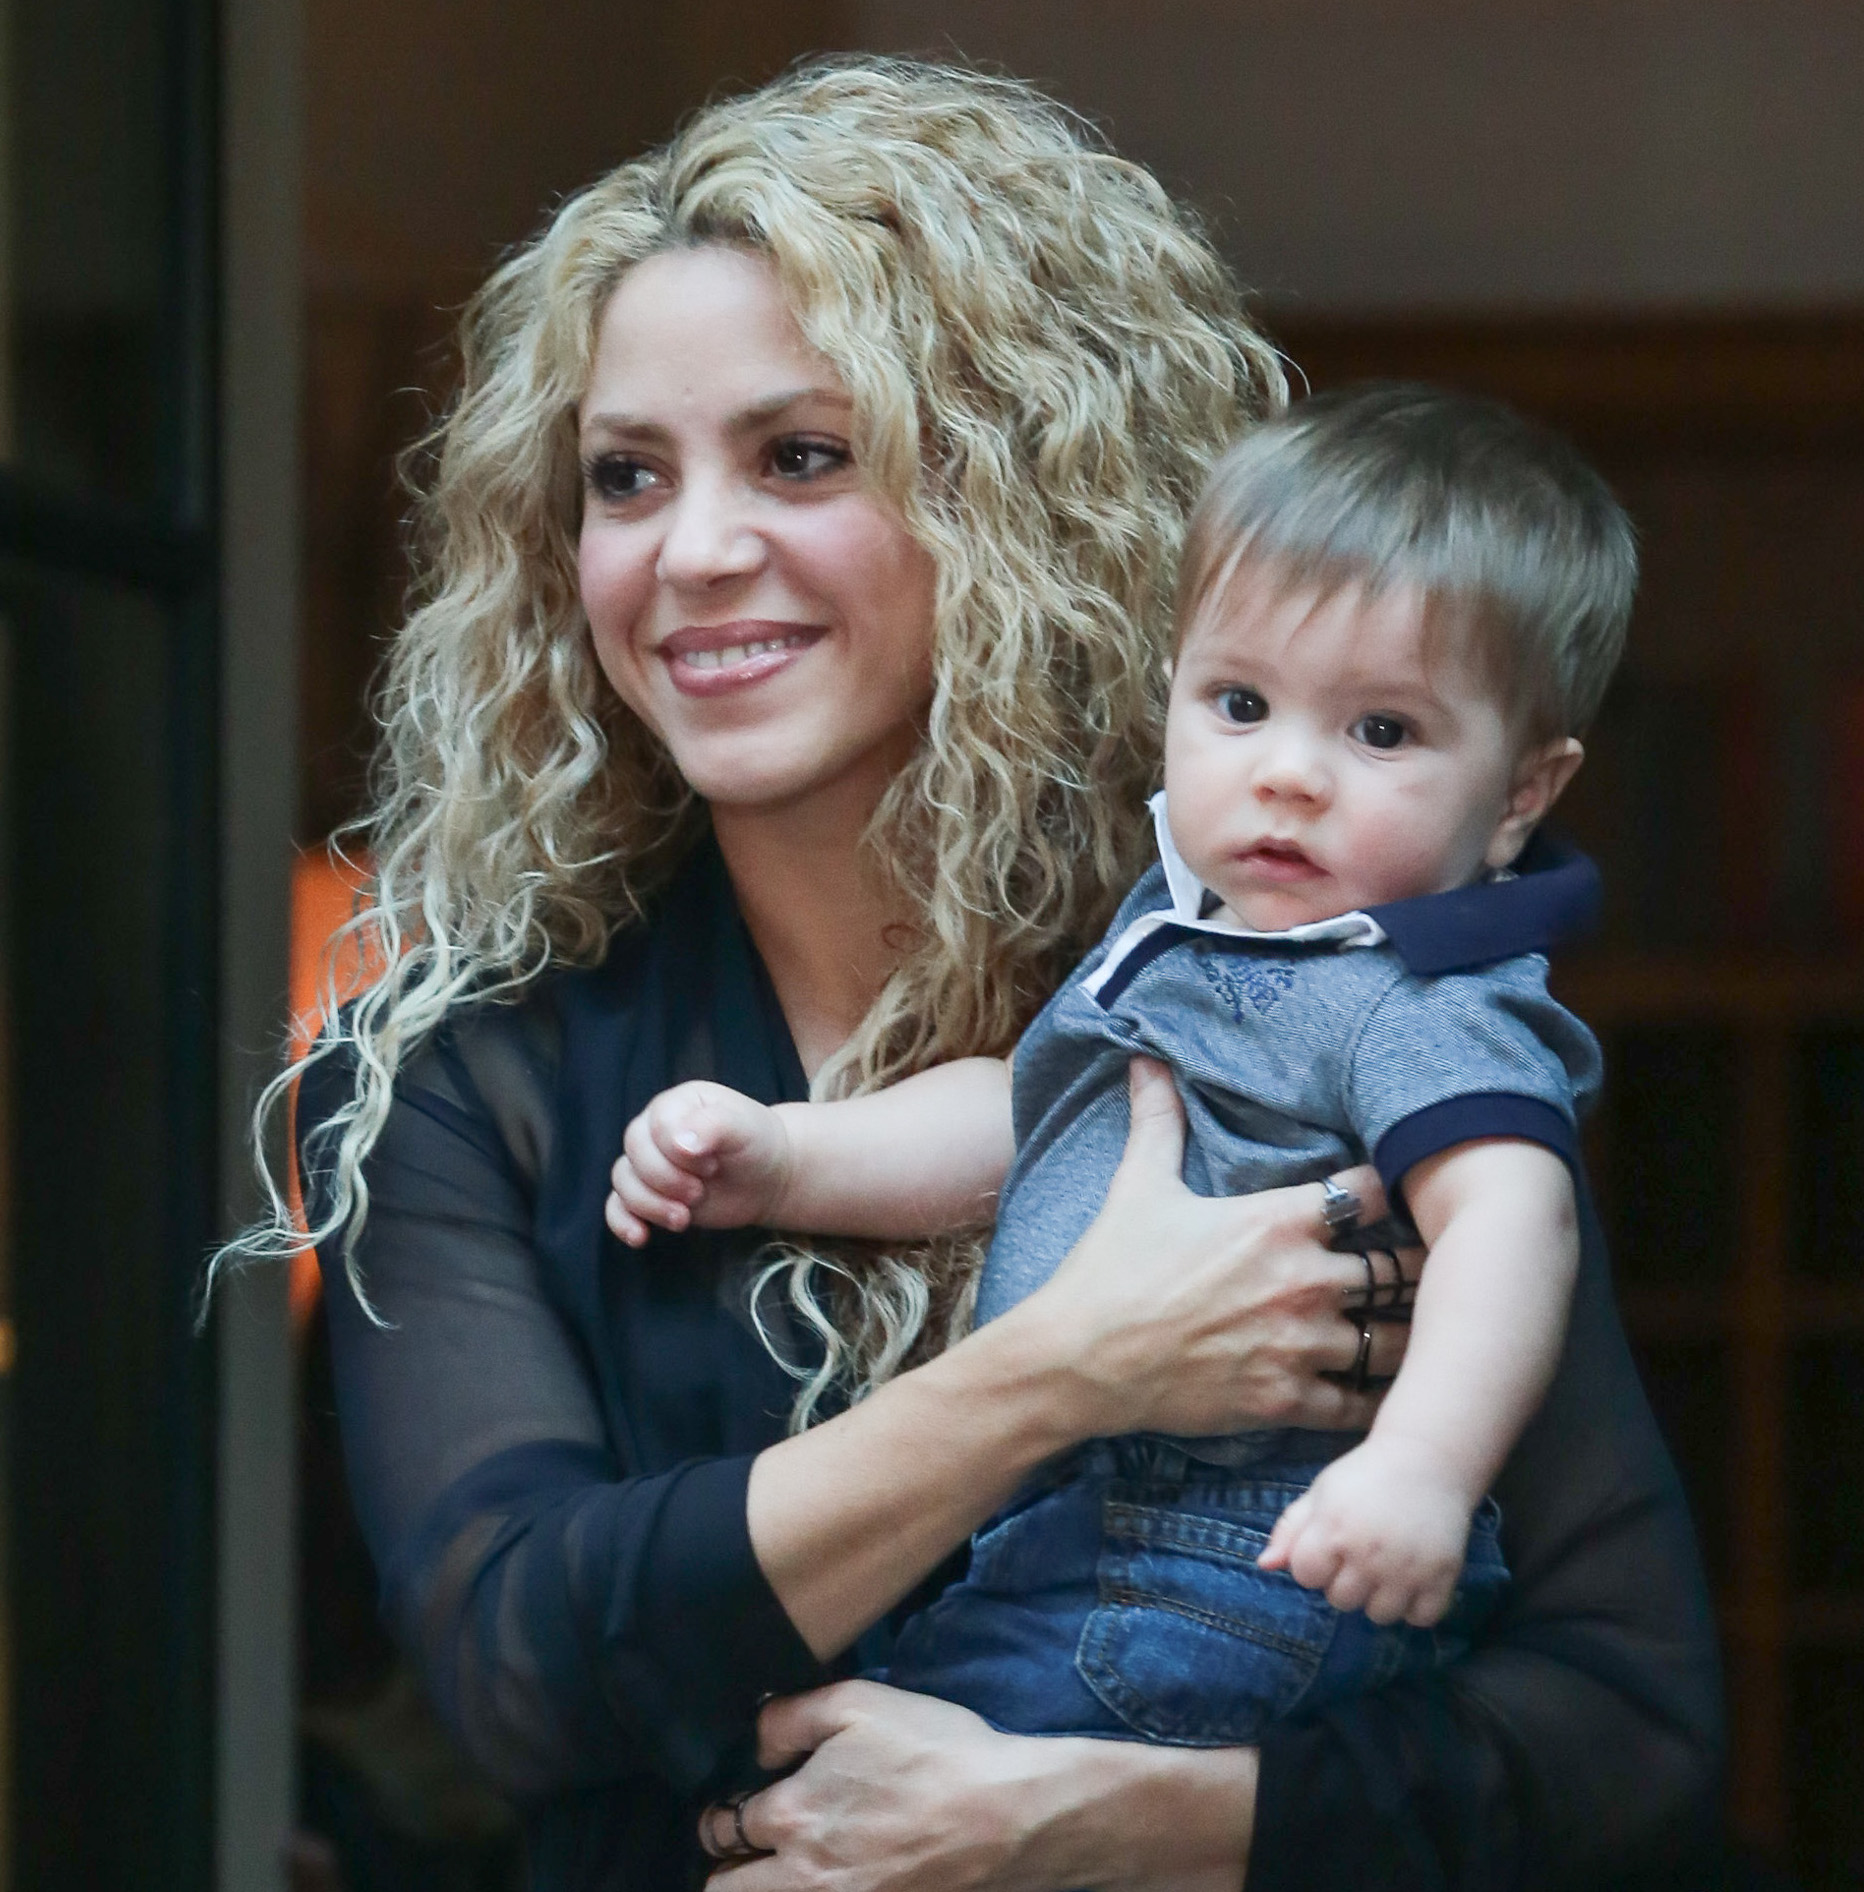 Shakira Reveals She Canceled Performances Due to 21-Month-Old Son's Illness - Life & Style